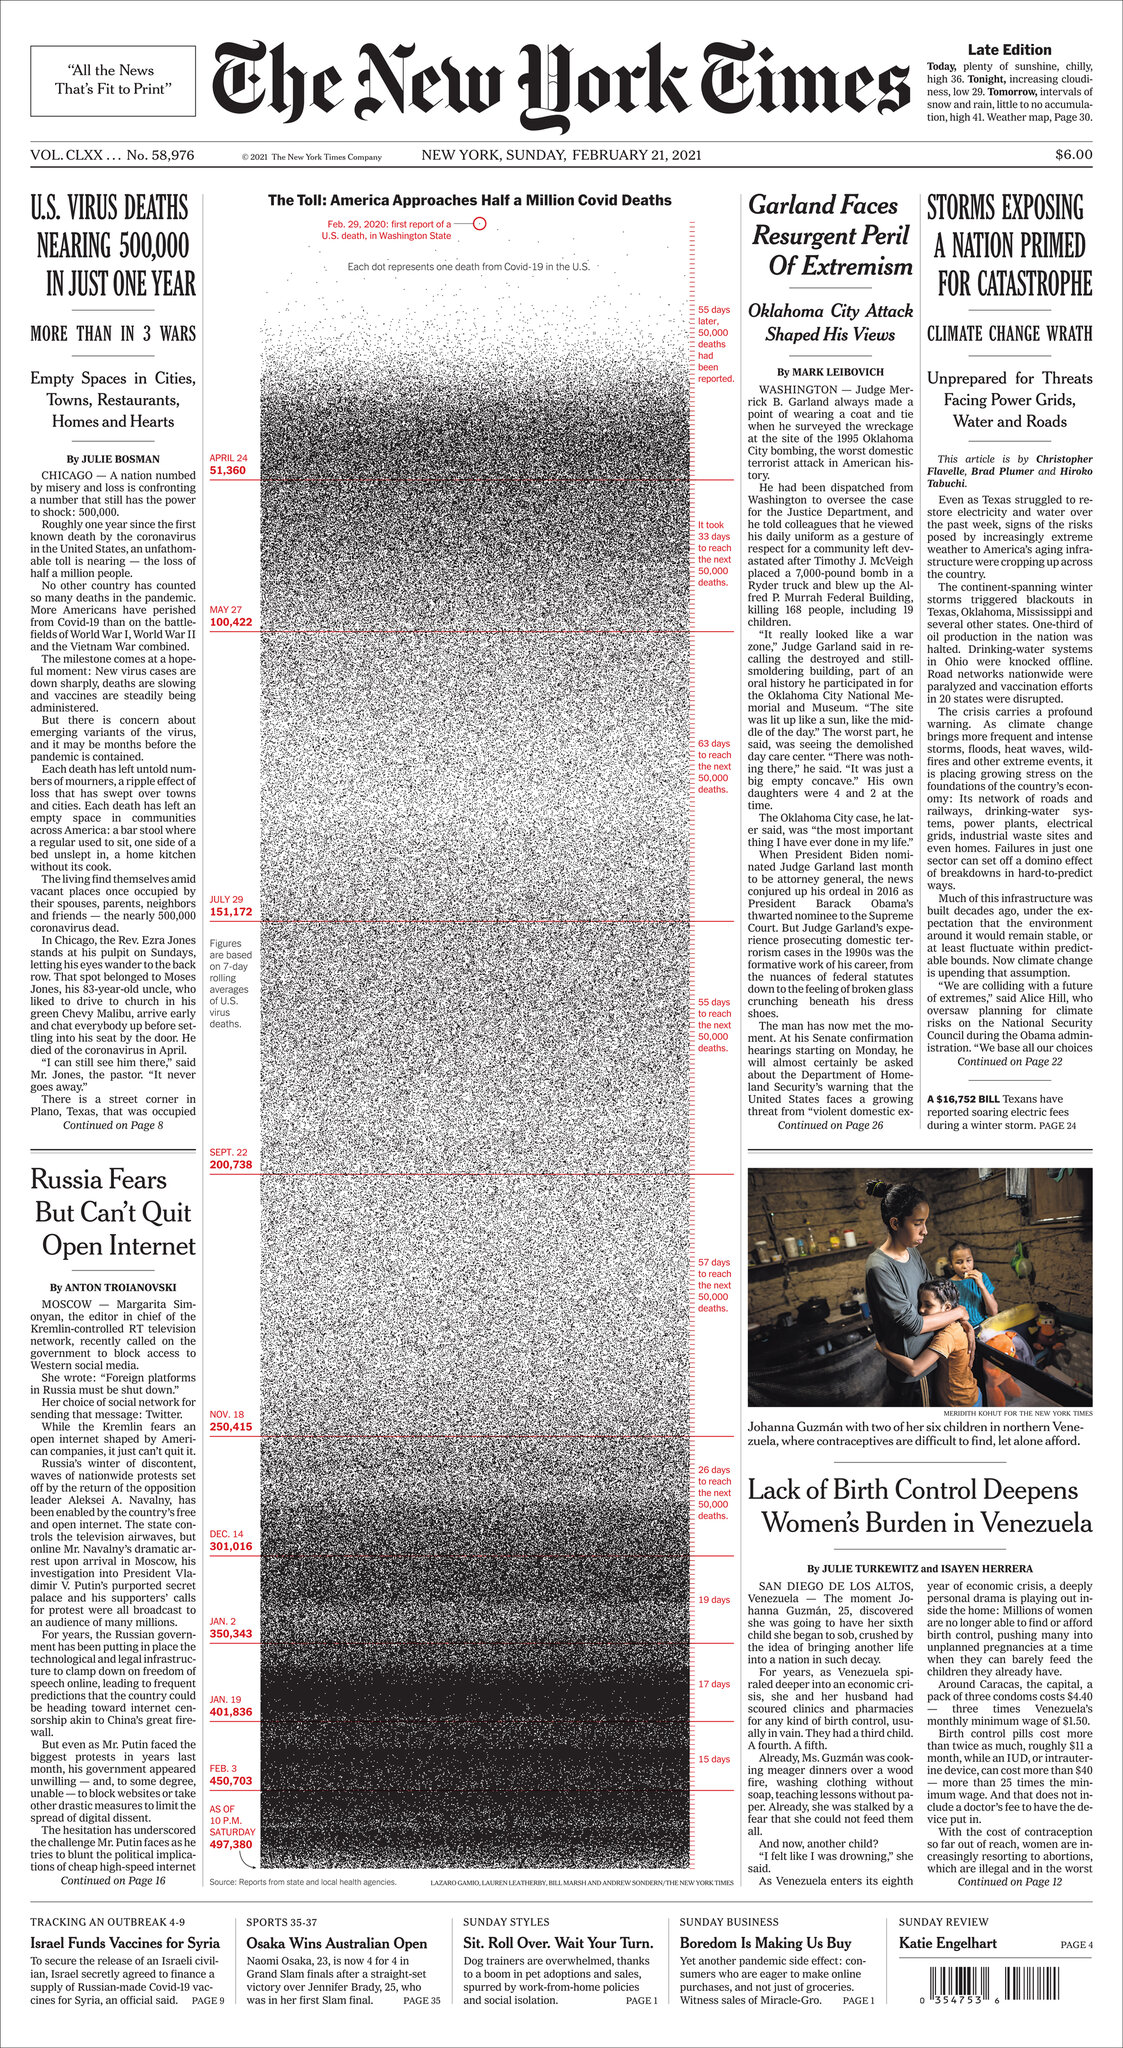 Foto: The New York Times